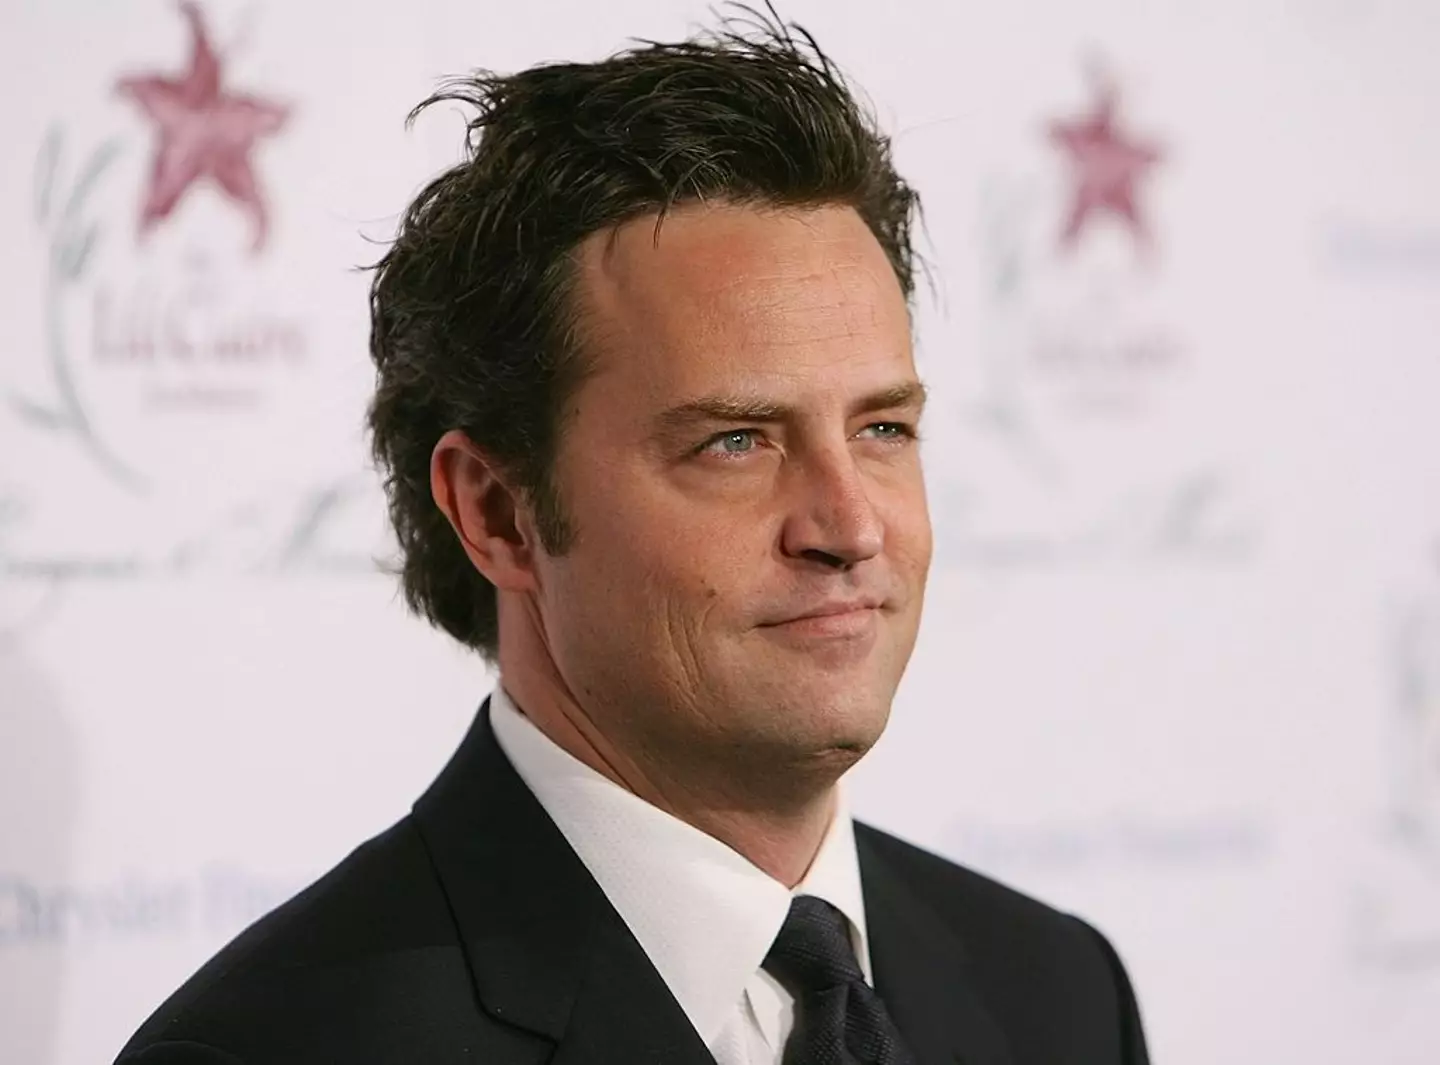 Matthew Perry died in October last year. (Michael Buckner / Staff / Getty Images)